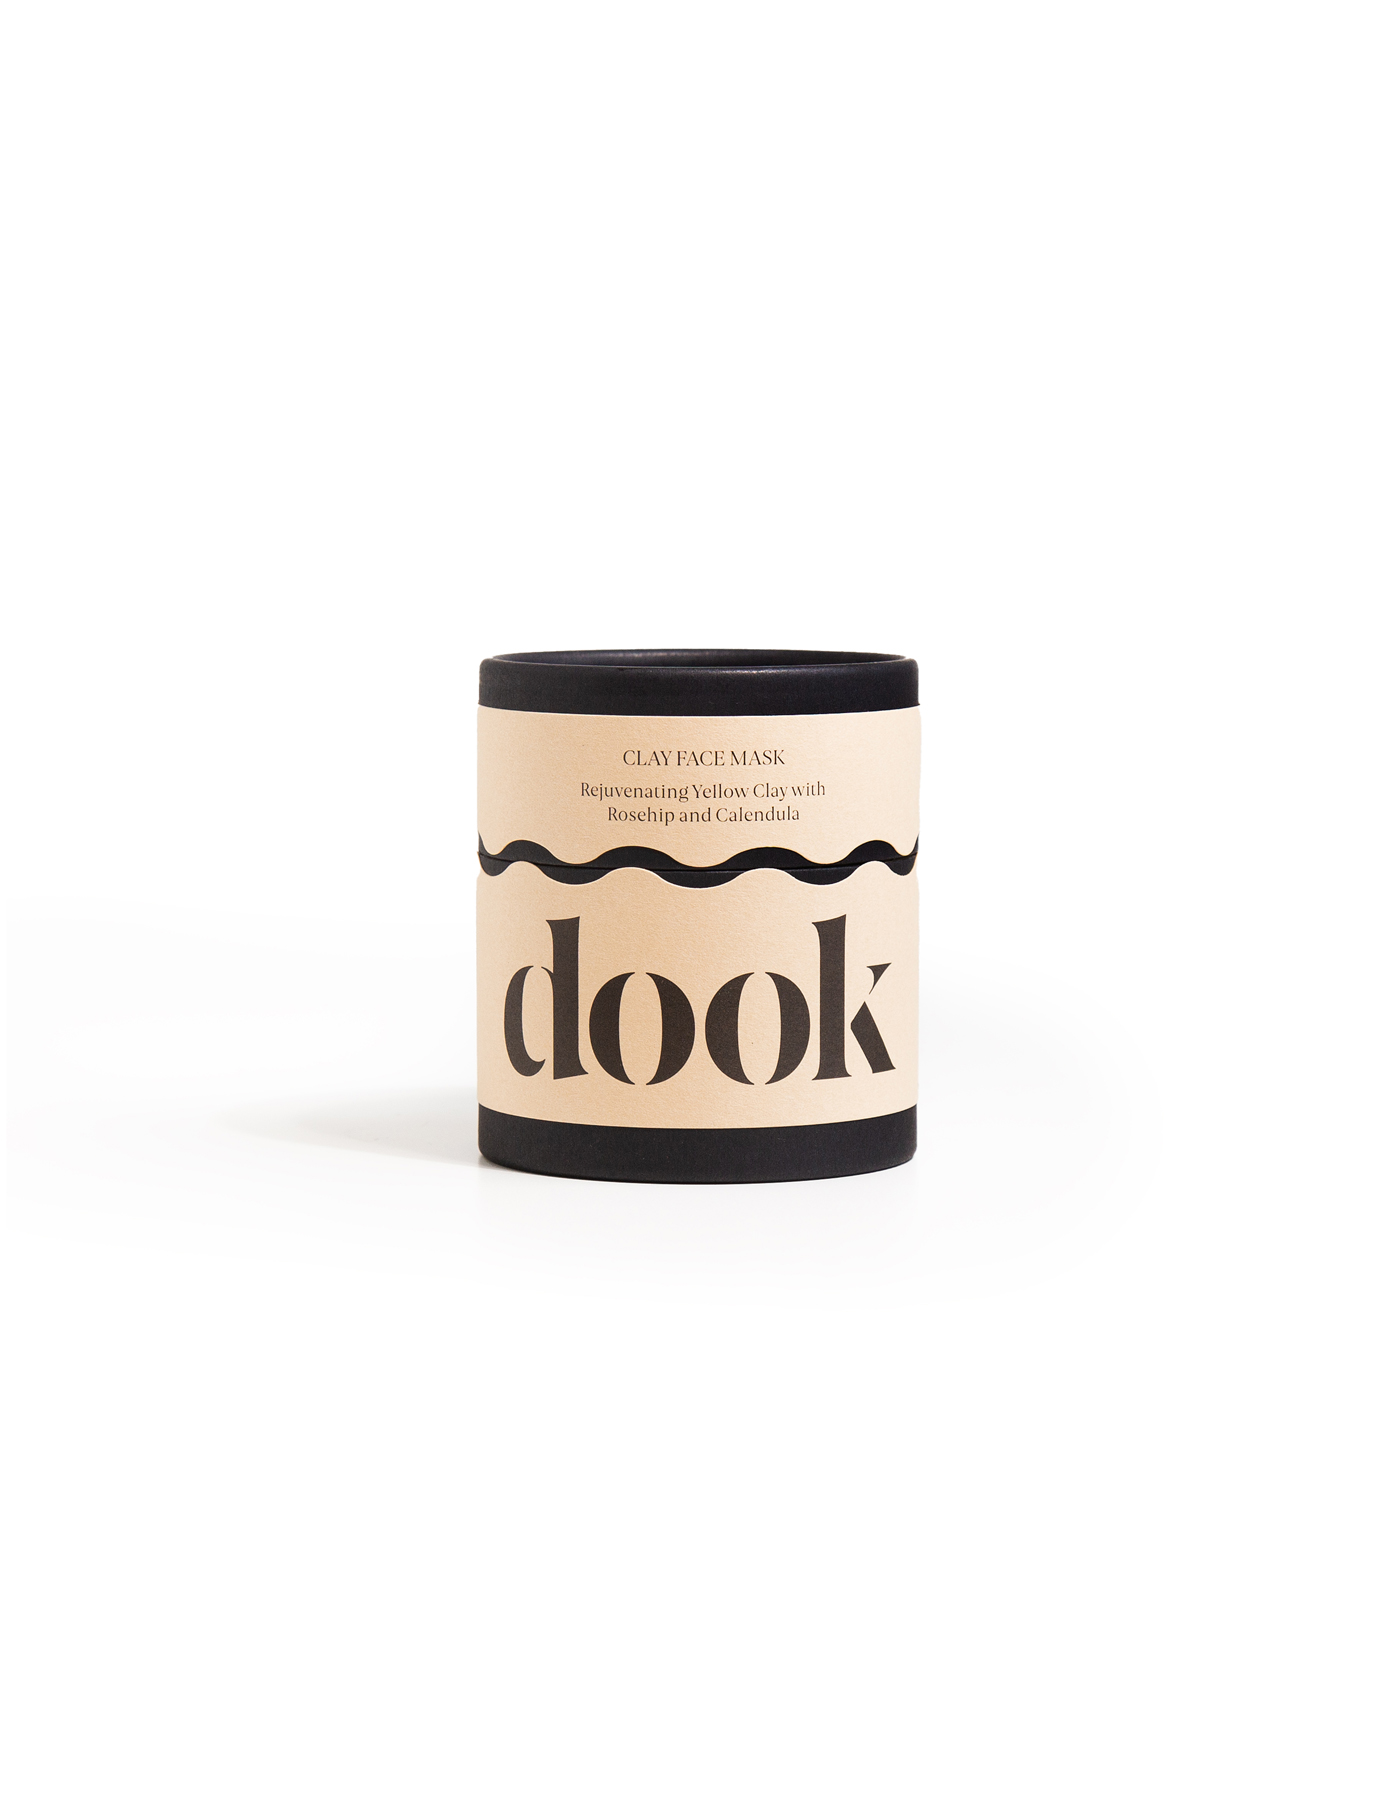 dook-ltd-rejuvenating-yellow-clay-with-rosehip-and-calendula-clay-mask